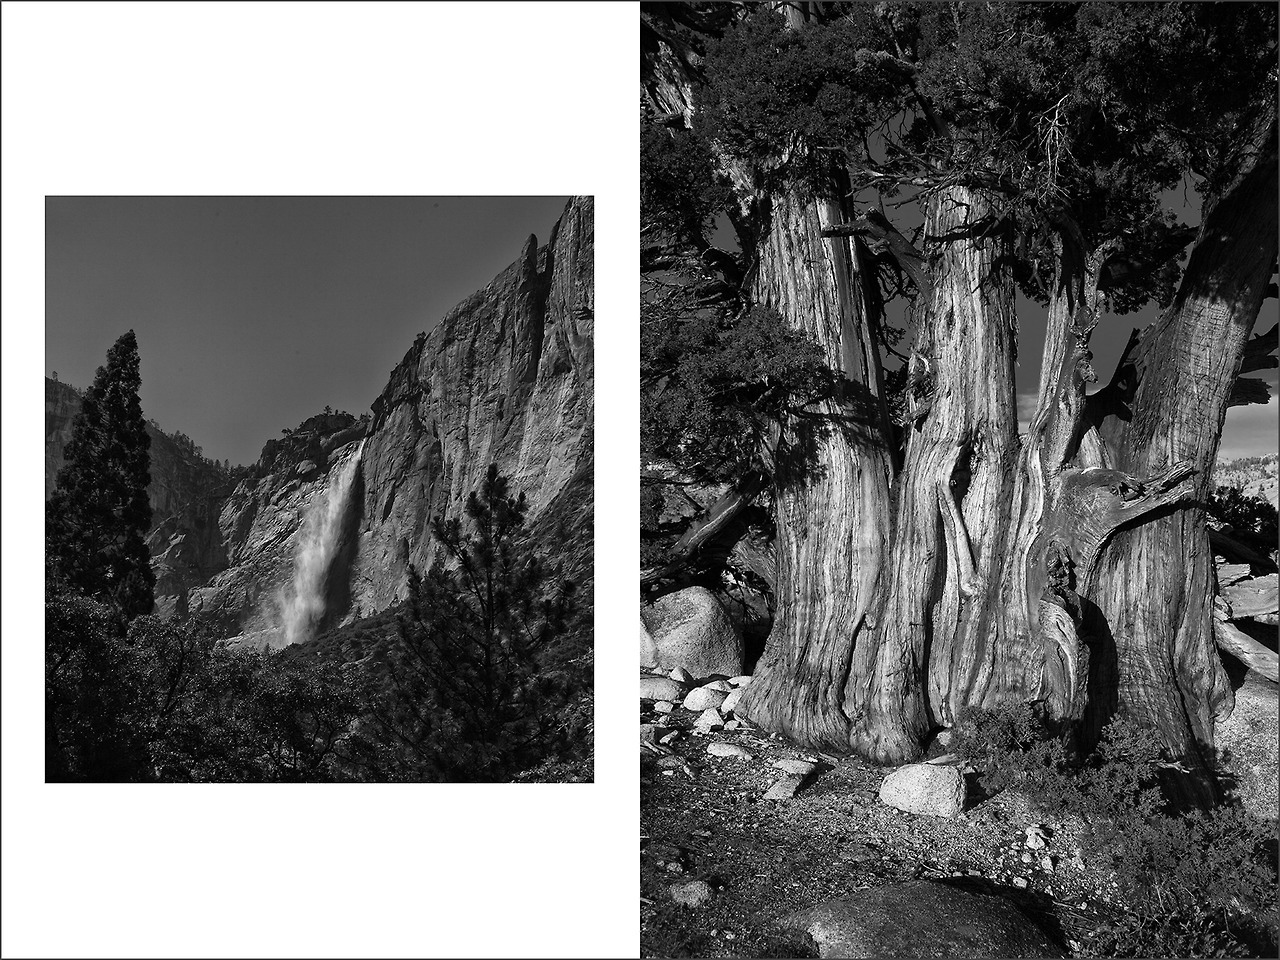 jamesirelandphoto:
“Yosemite in B&W June 2016, Nos. 2 & 3 (Yosemite National Park, CA | USA)
[c] 2016 James A. Ireland | All Rights Reserved | www.jamesireland.ca
Some of my fashion and model photography work is here...